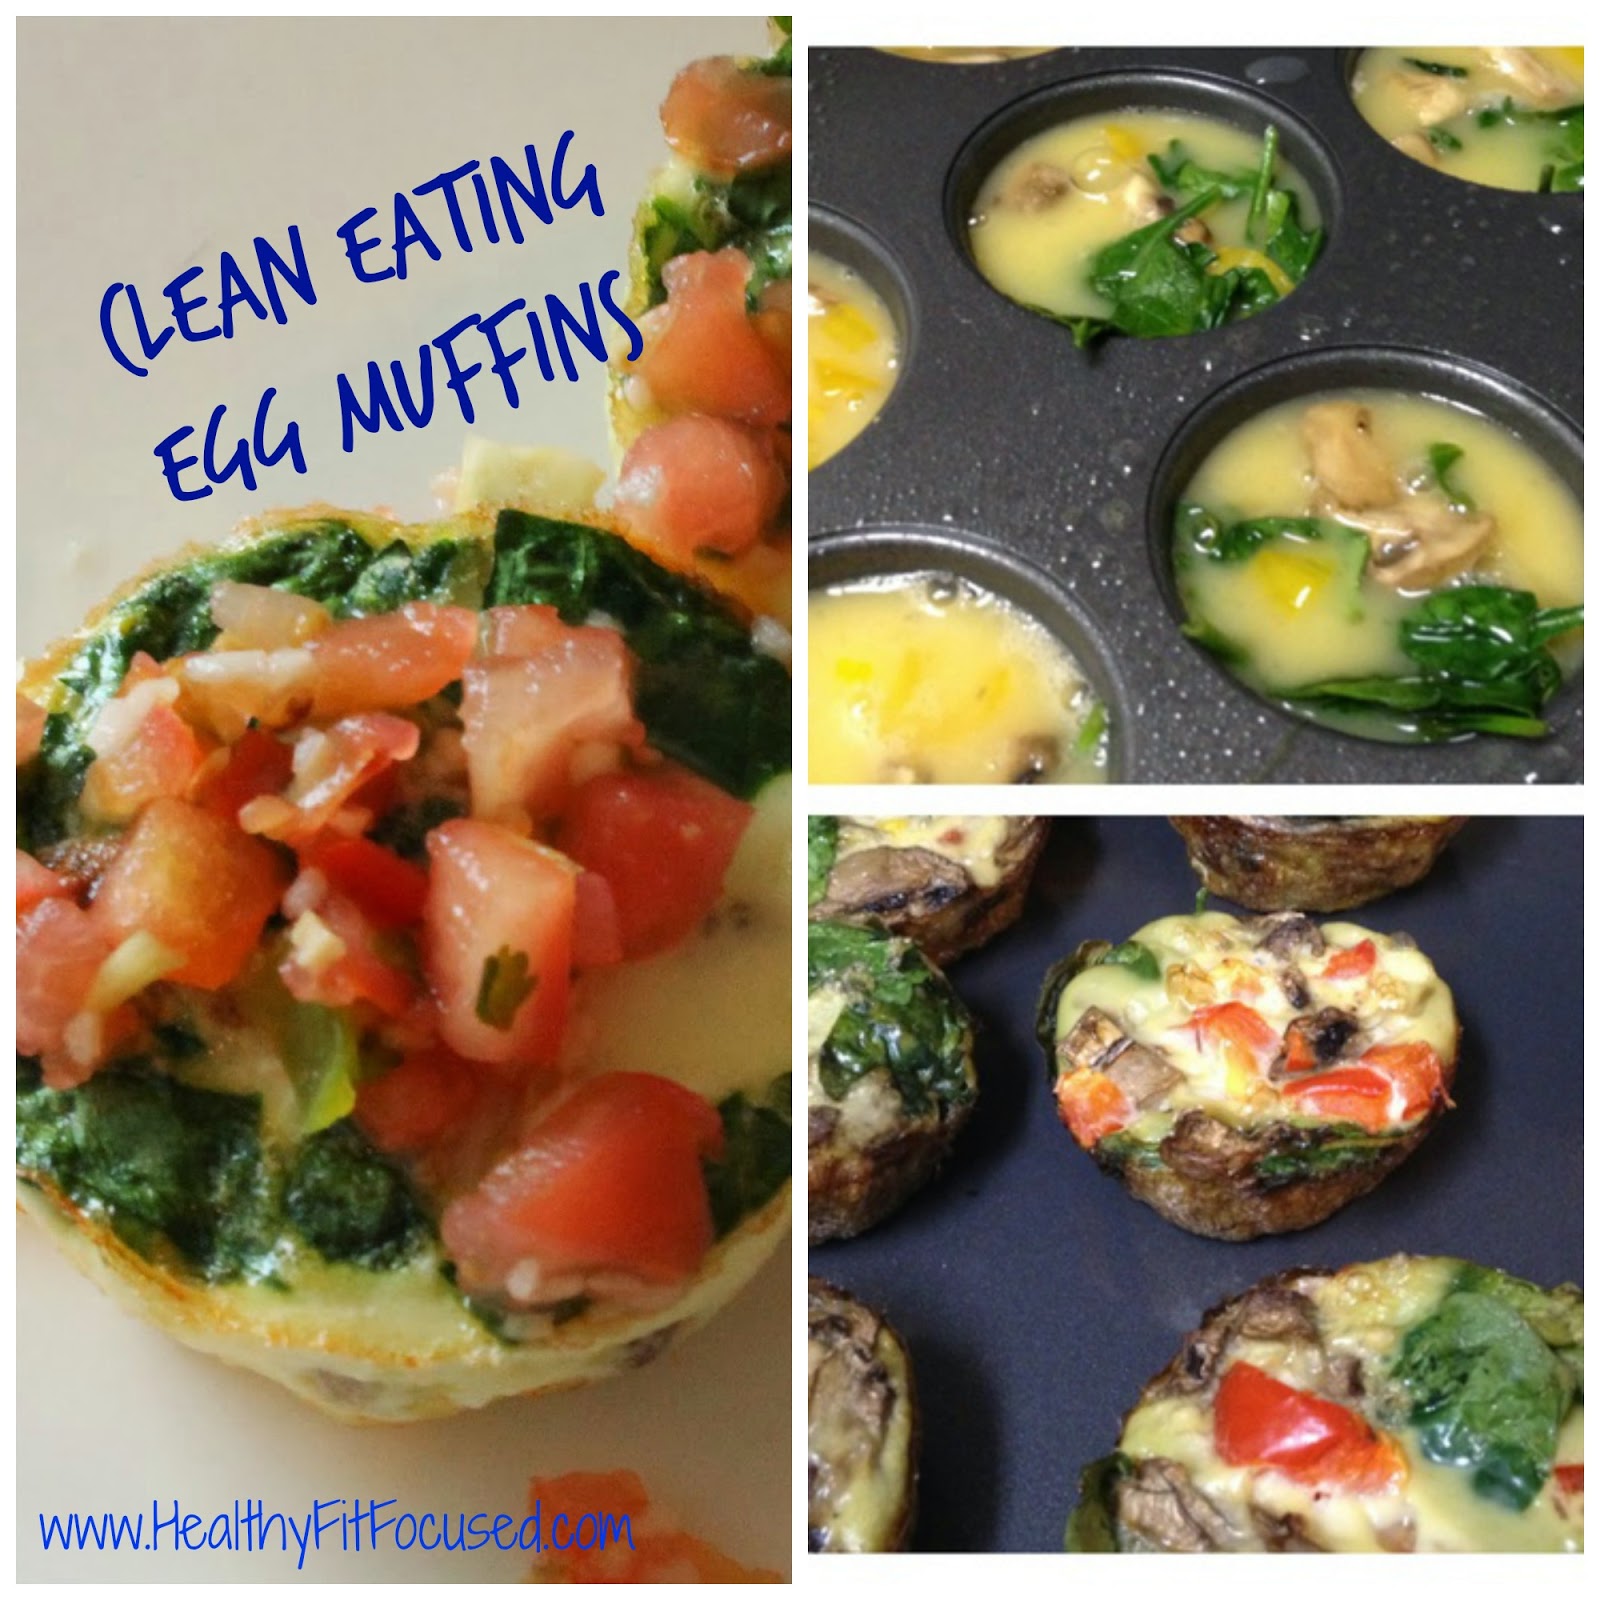 Healthy, Fit, and Focused: Clean Eating Egg Muffins